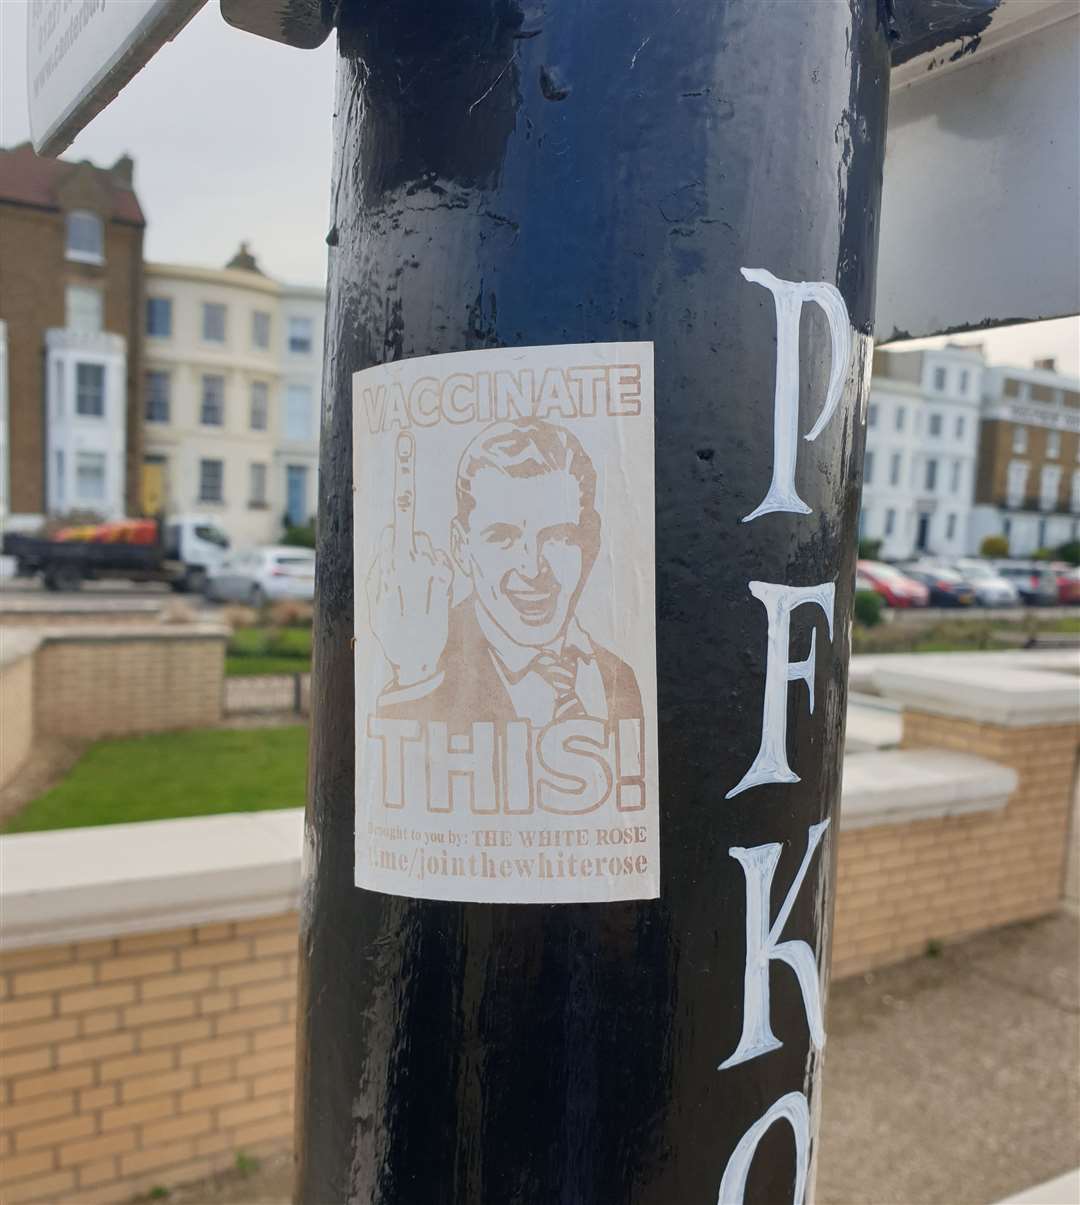 One of the anti-vaxx stickers found on Herne Bay's seafront